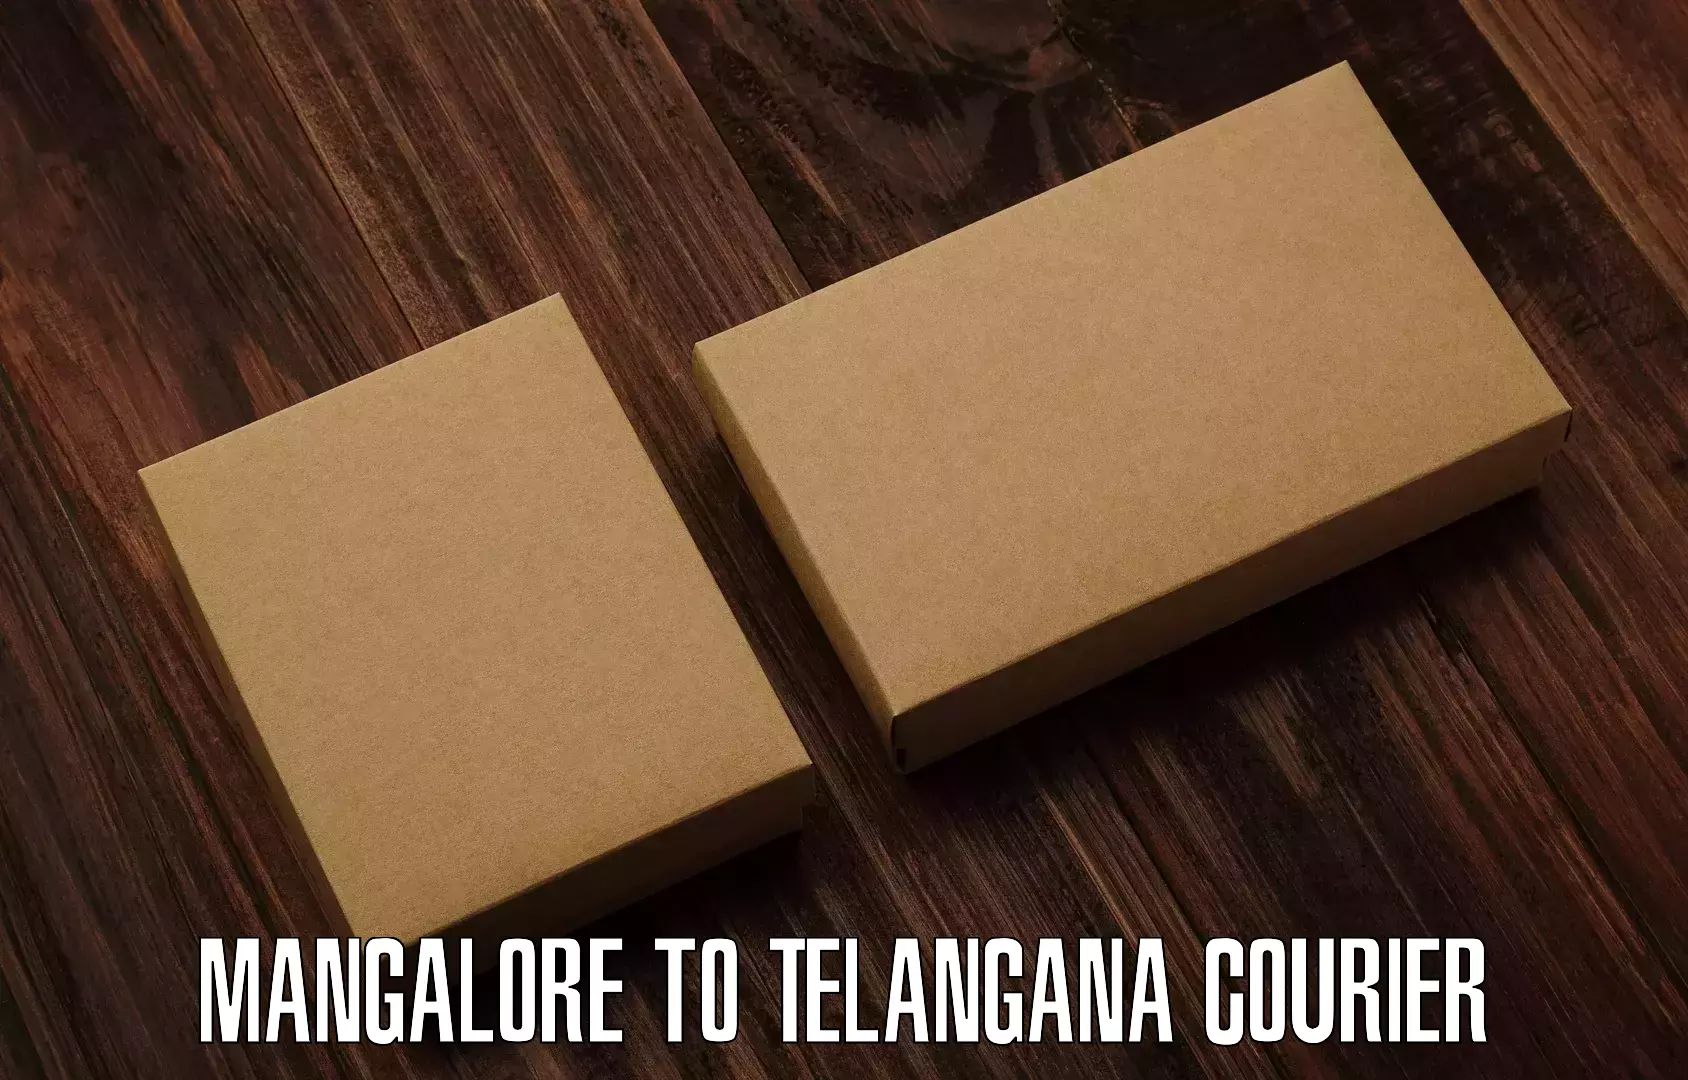 Customer-centric shipping Mangalore to Husnabad